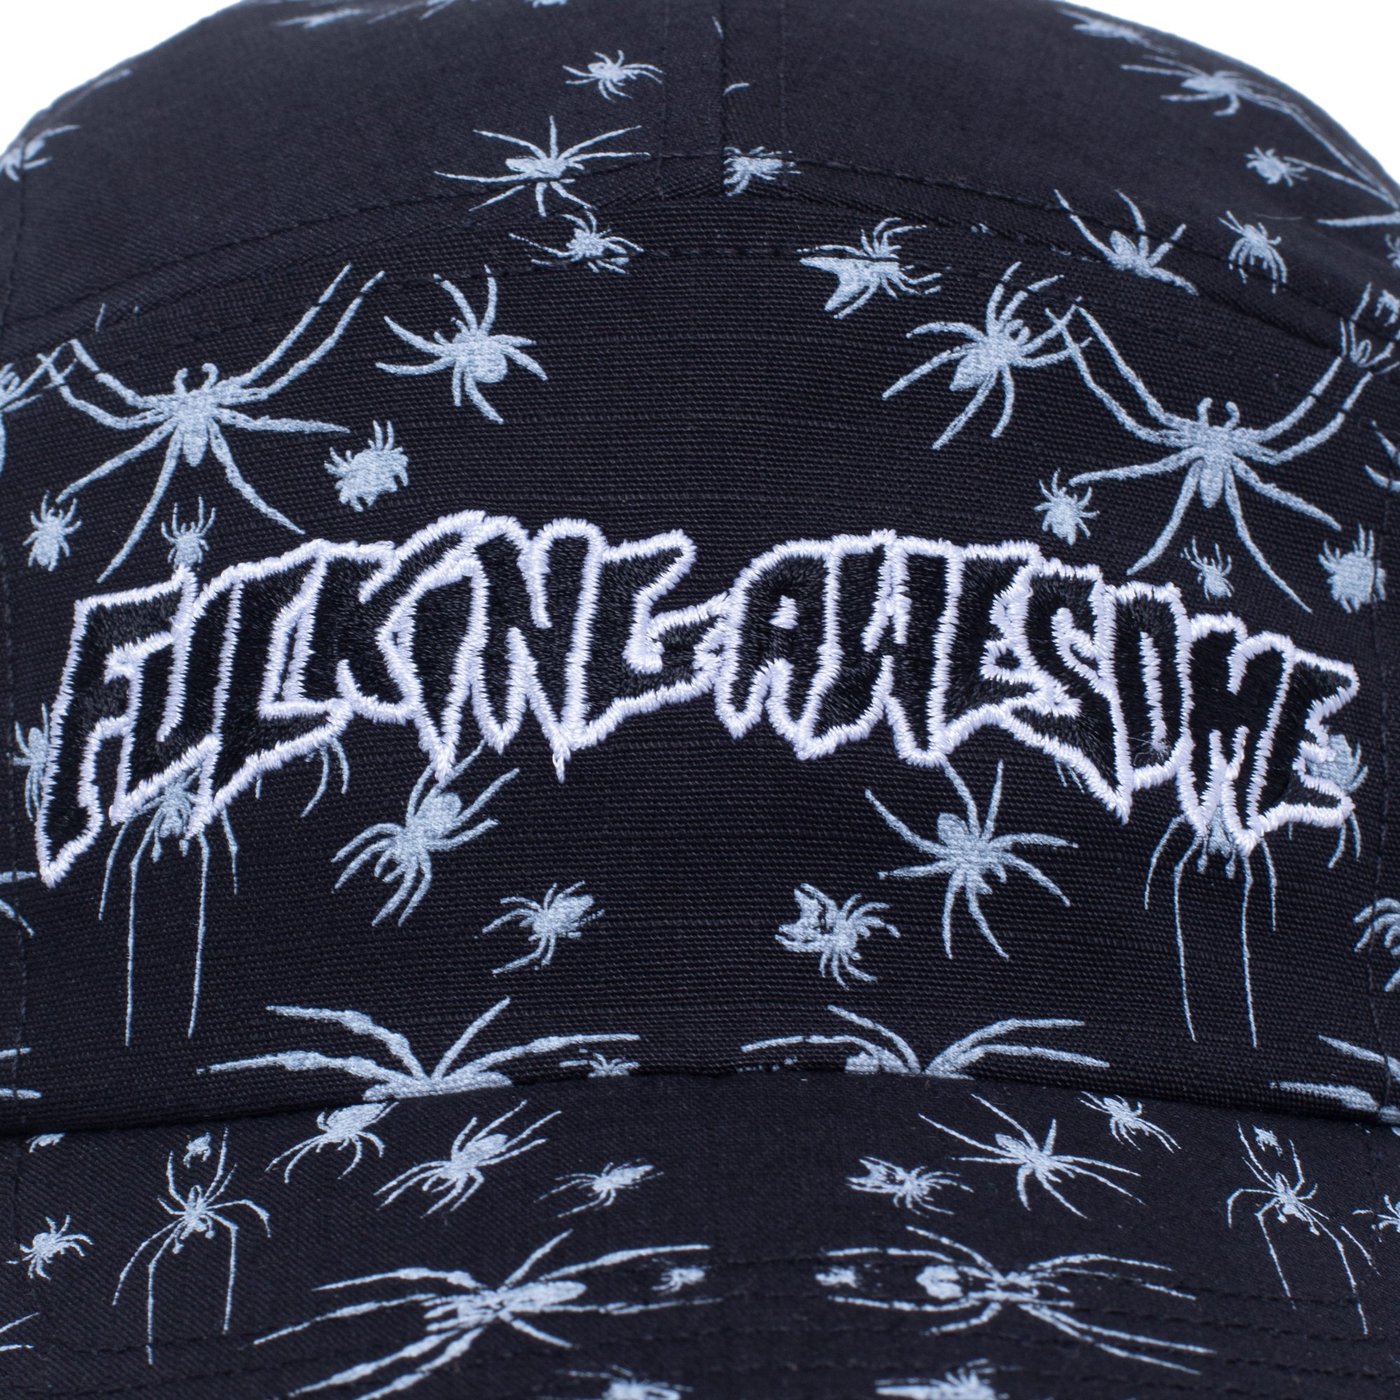 Fucking Awesome - Gorro Snapback Spider Stamp Volley Black